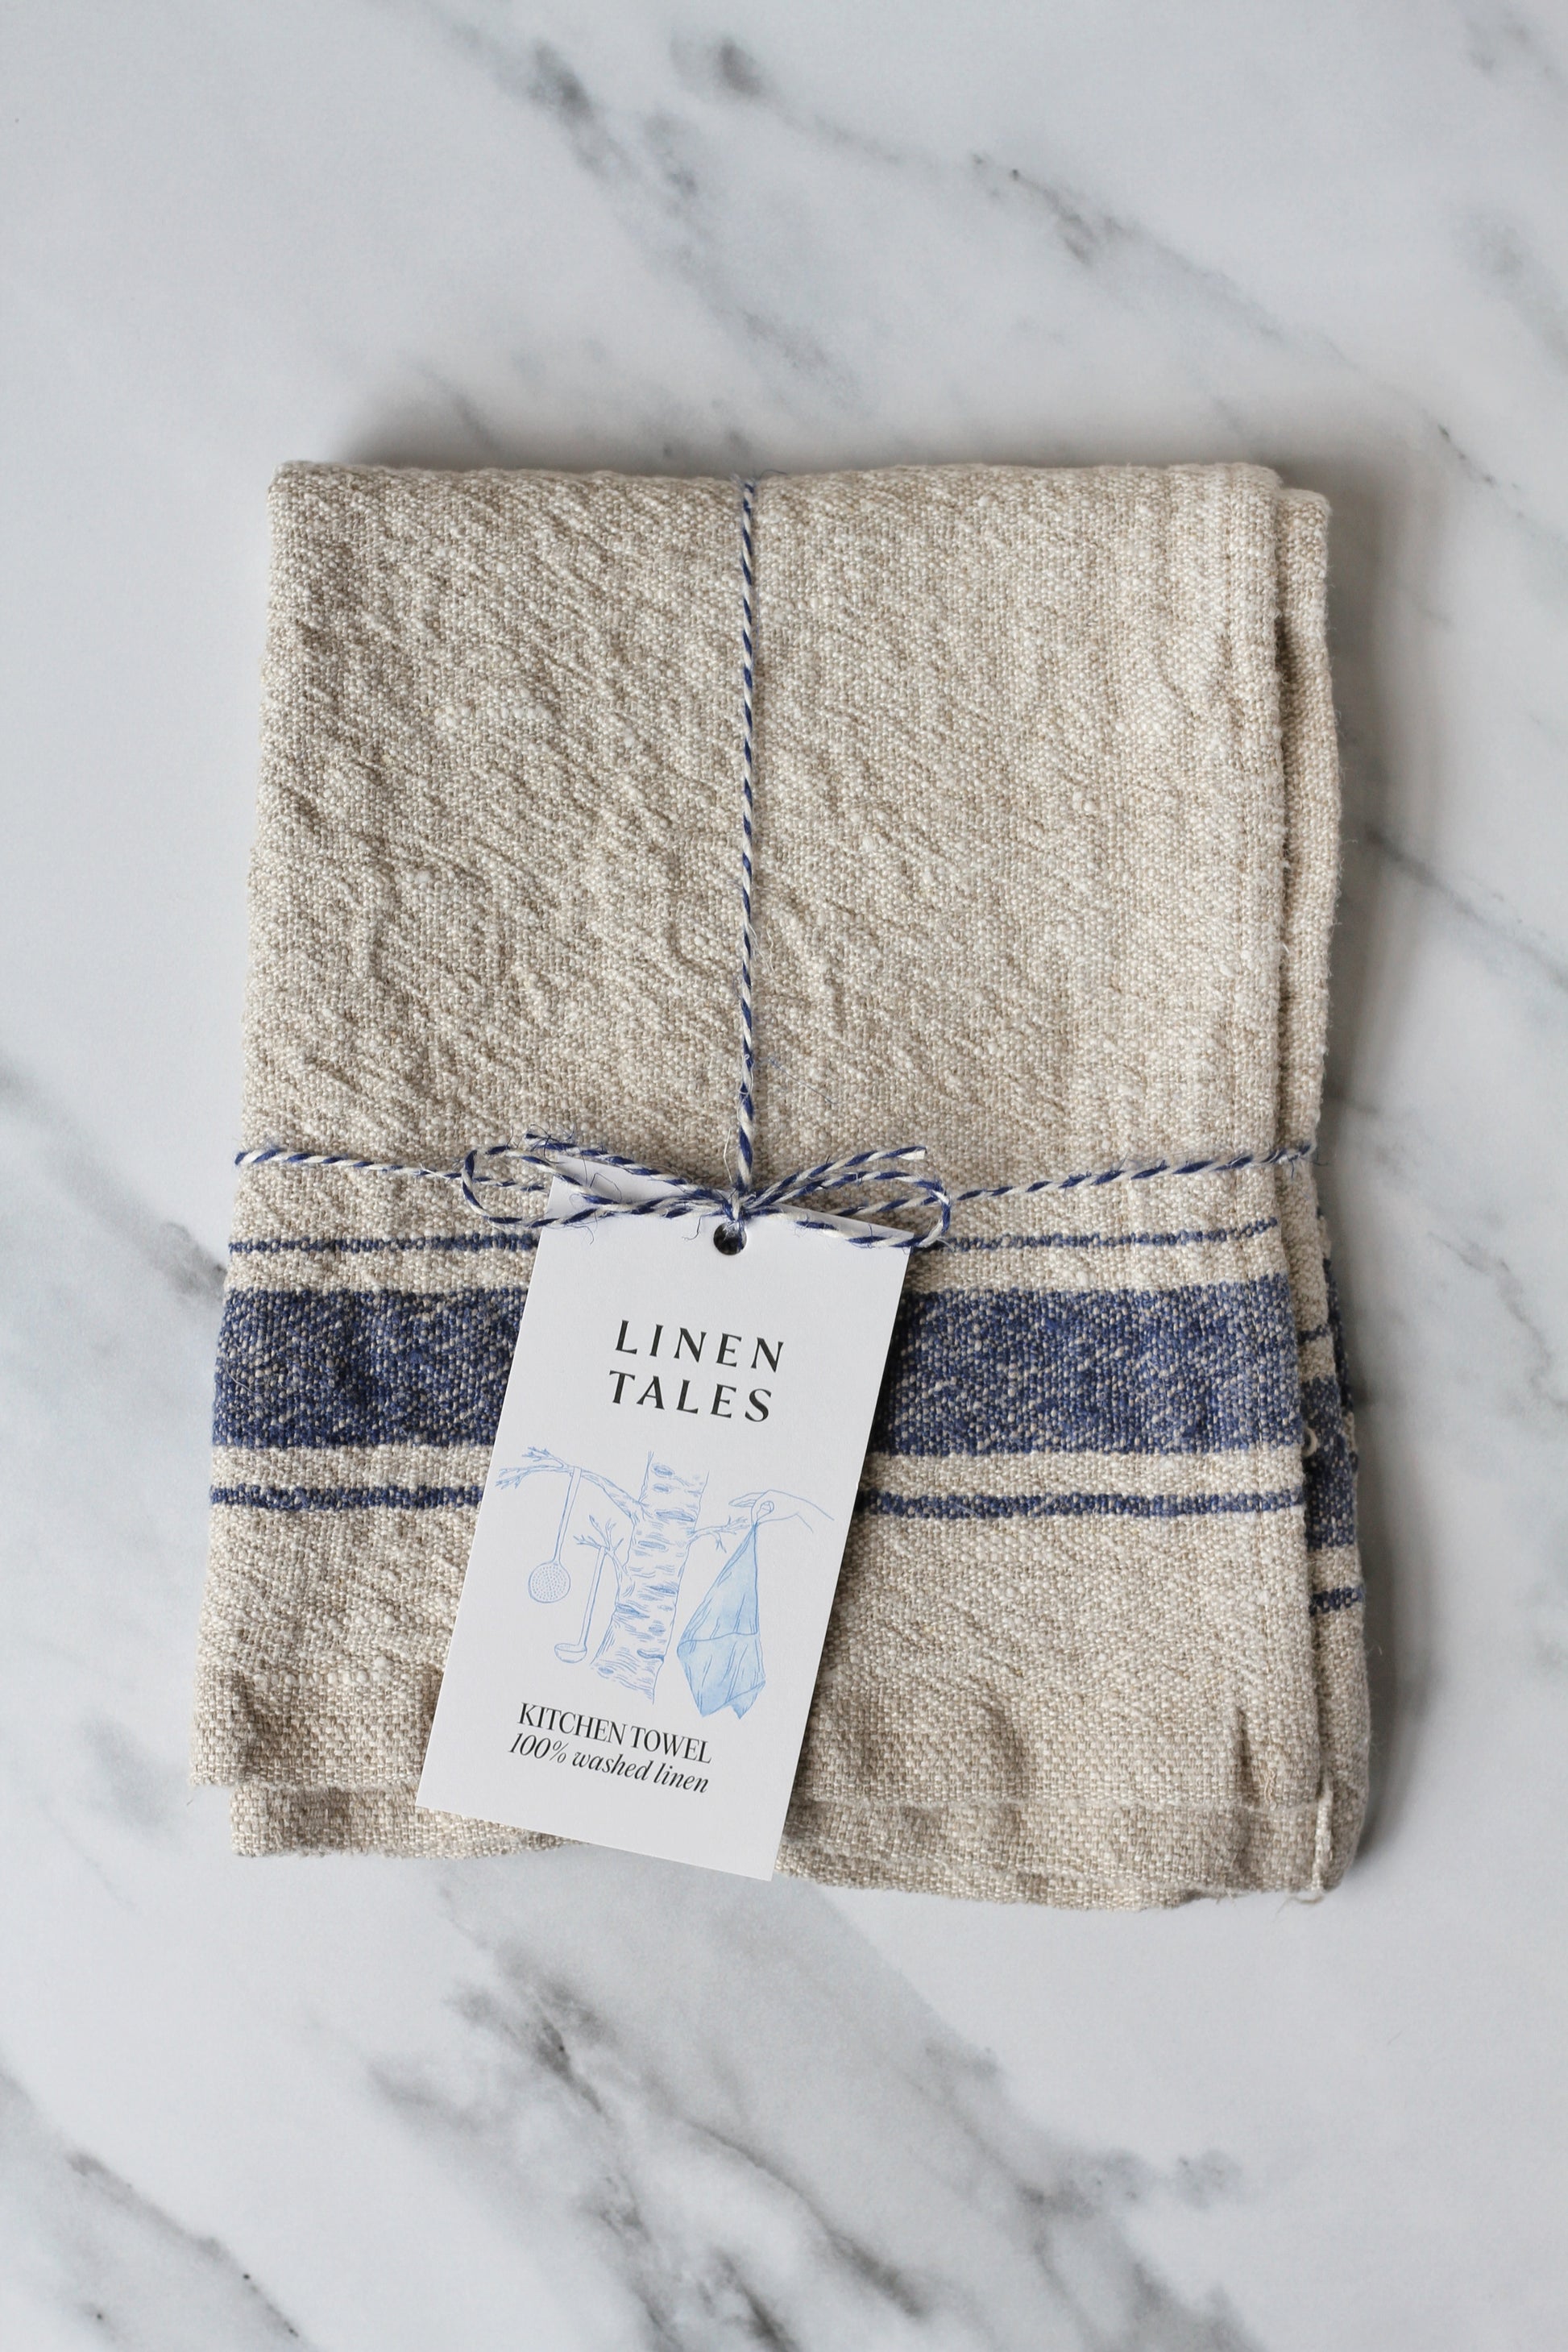 rustic linen tea towel with blue stripe. french style